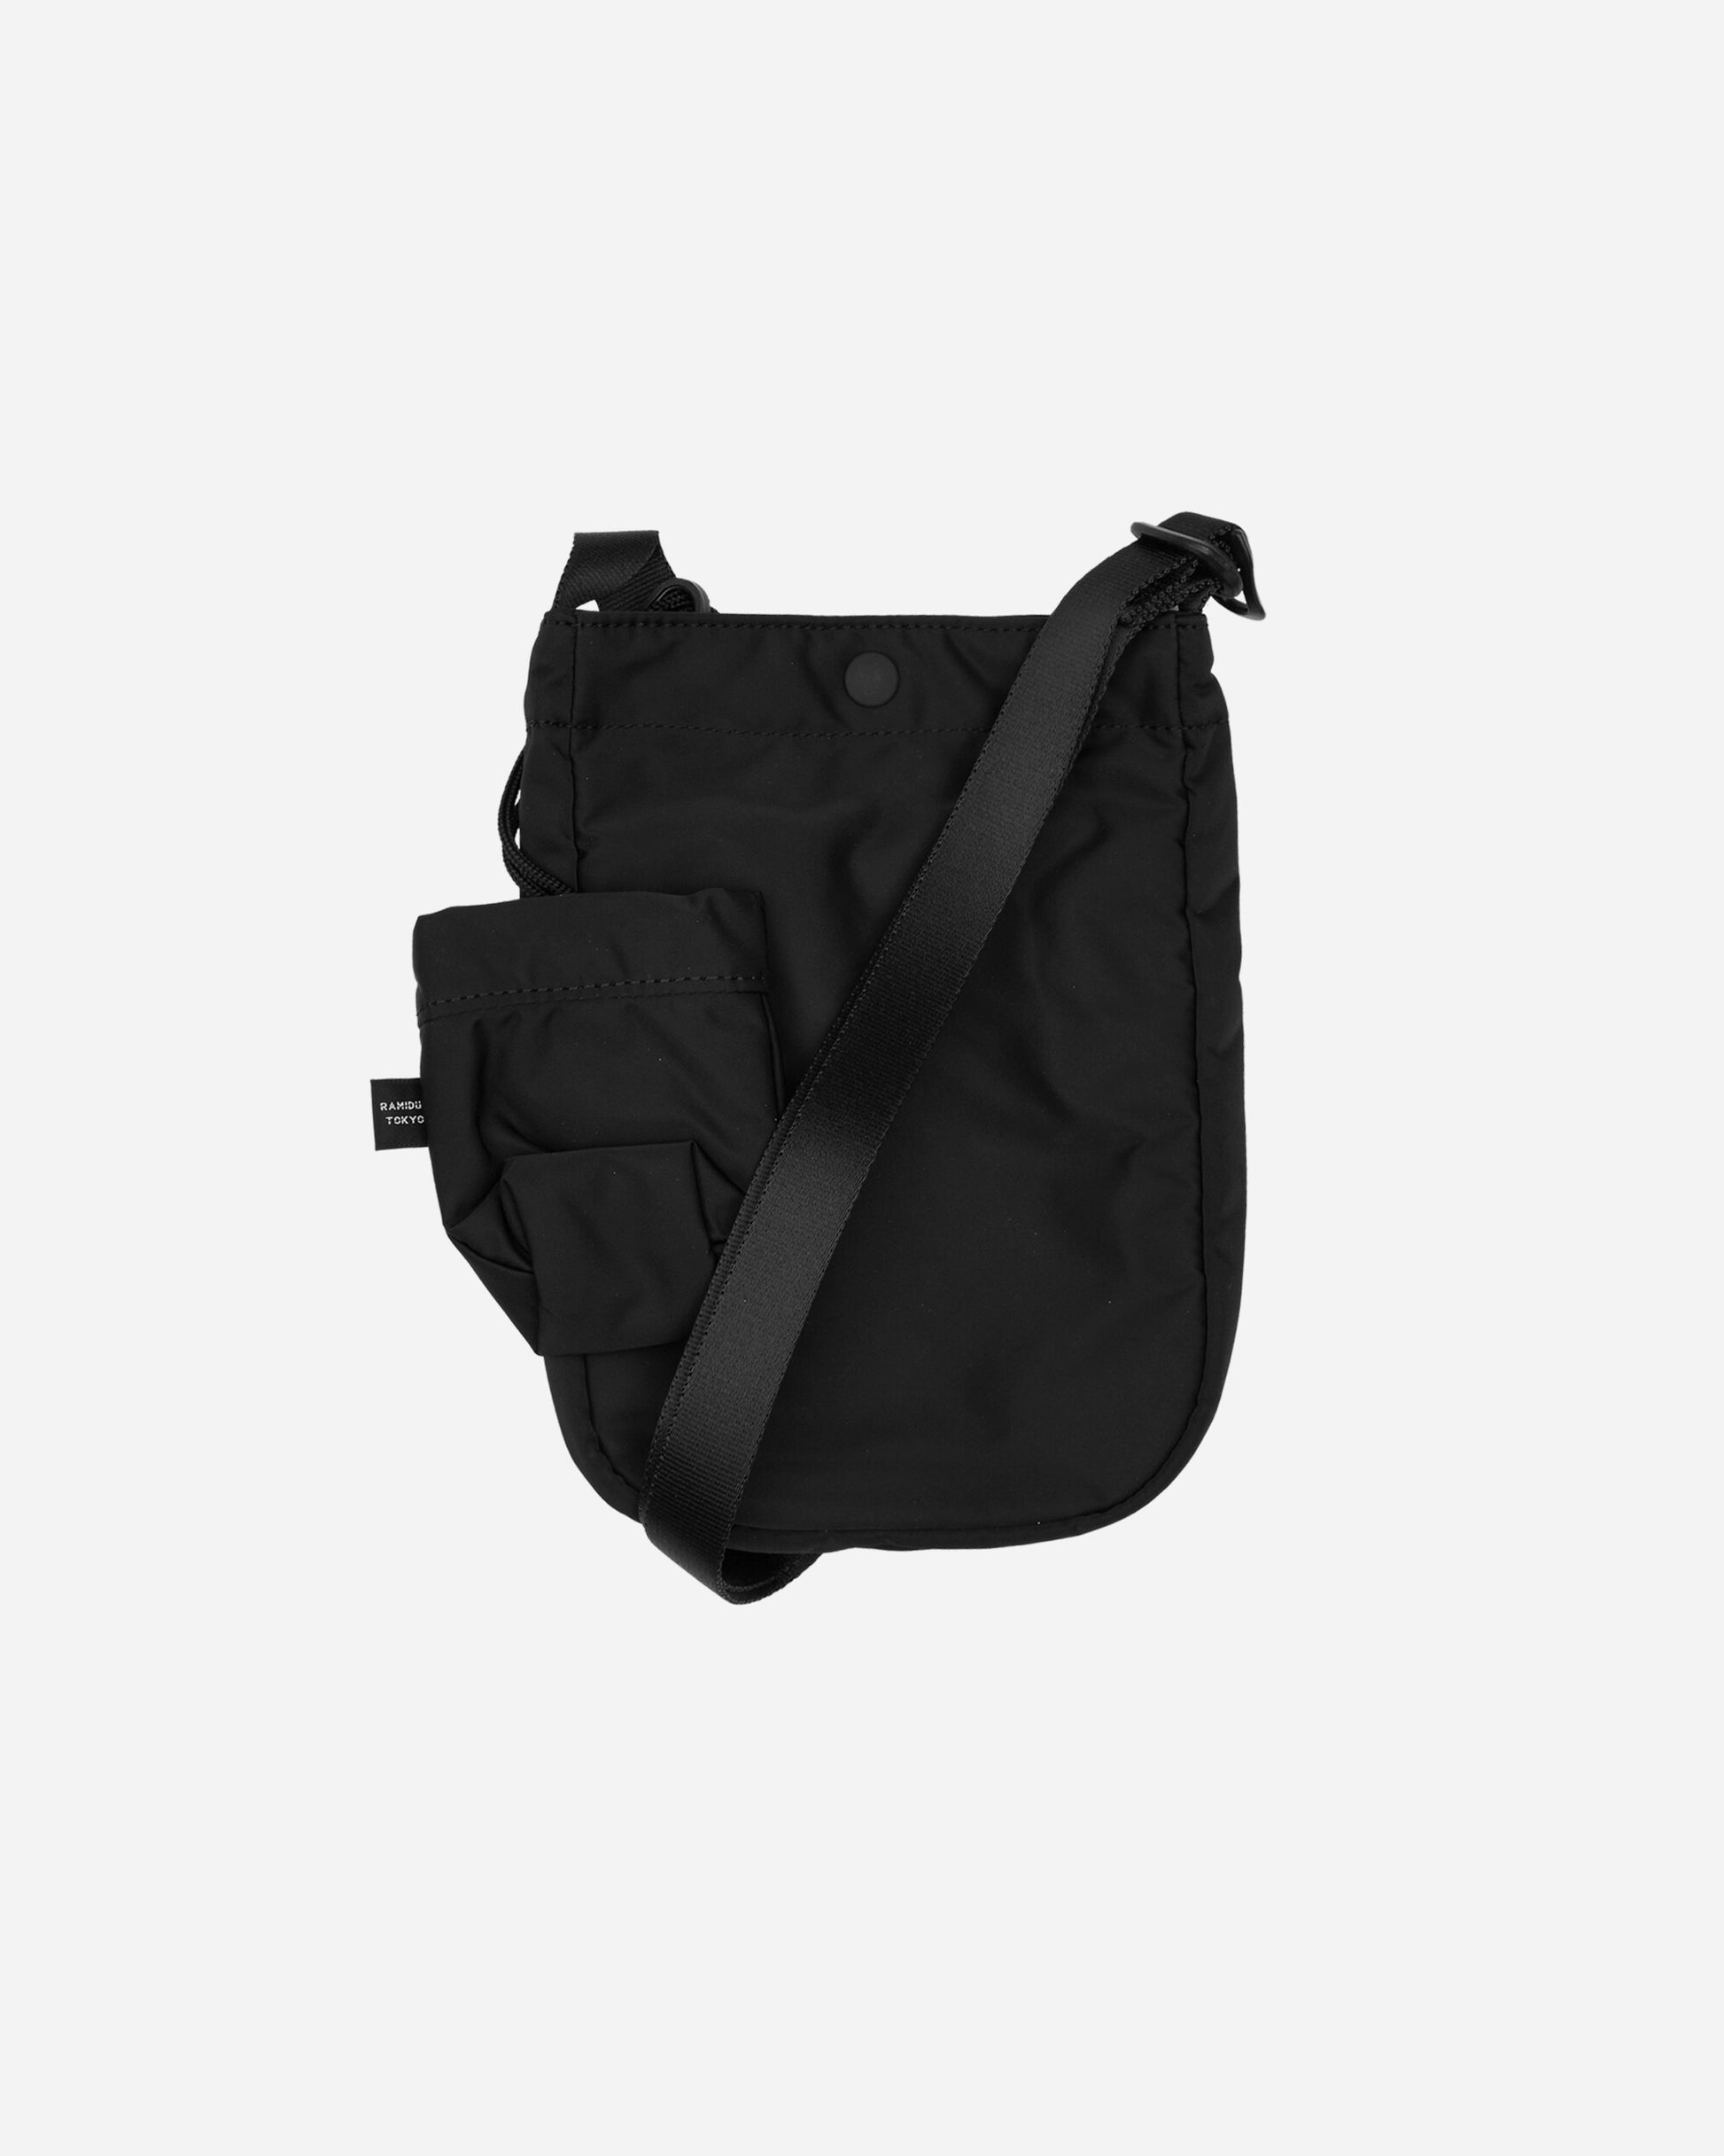 Ramidus Shoulder Pouch Black Bags and Backpacks Pouches B011029 001